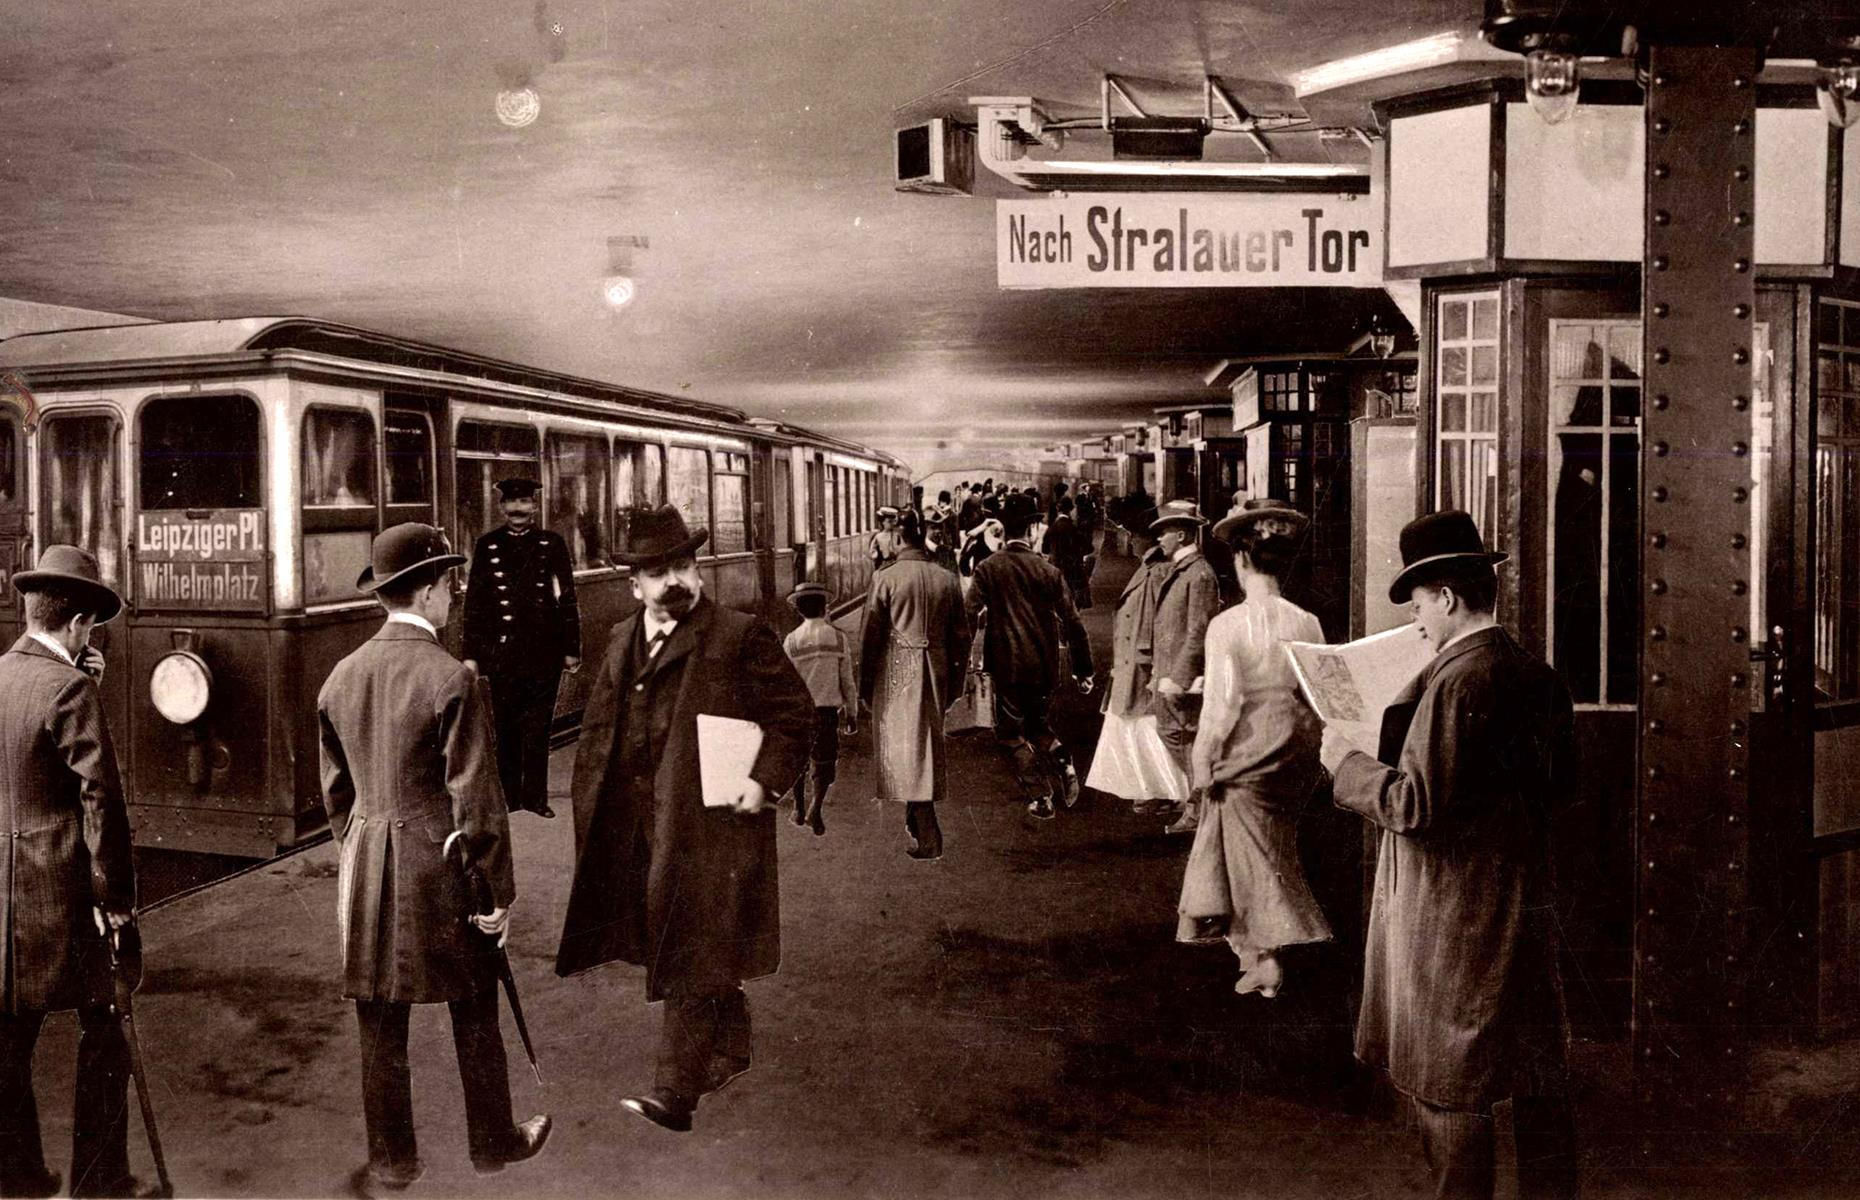 Berlin's U-Bahn is another of Europe's older underground transit systems. It consists of both elevated and subterranean tracks, and it began operation in 1902, before being expanded throughout the 20th century. Here, in the 1930s, commuters buzz around the platform for trains to Stralauer Tor.